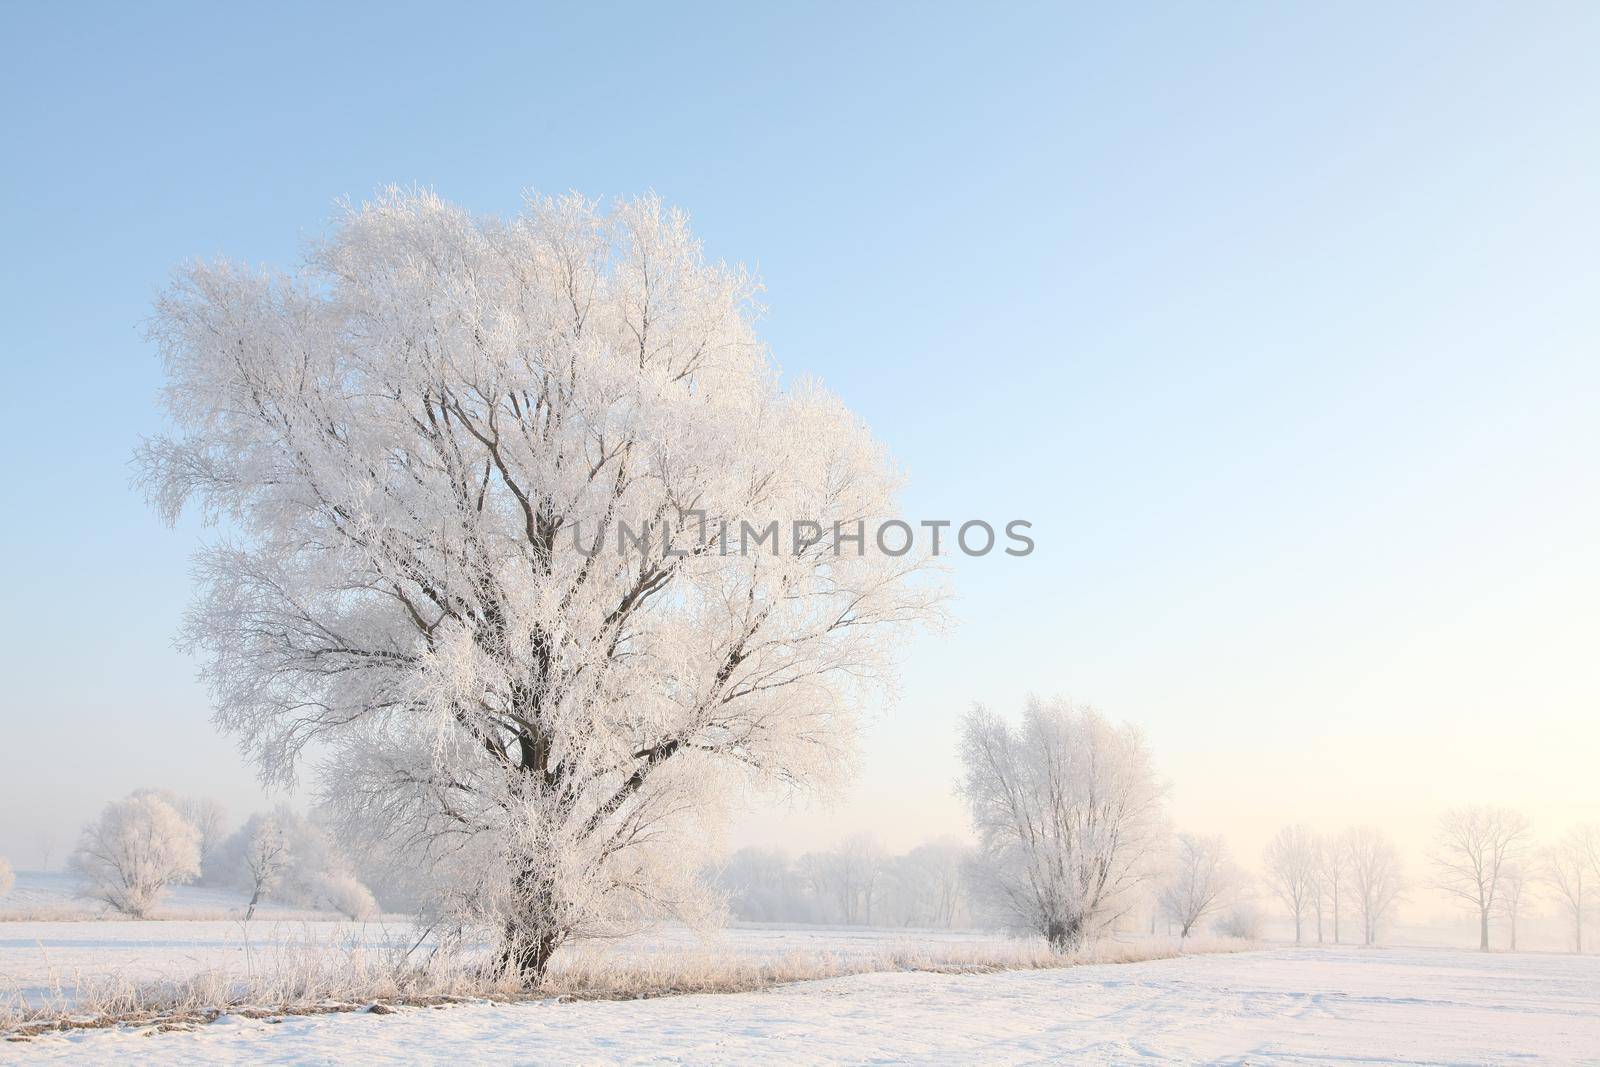 Frosty winter trees against the blue sky at sunrise.